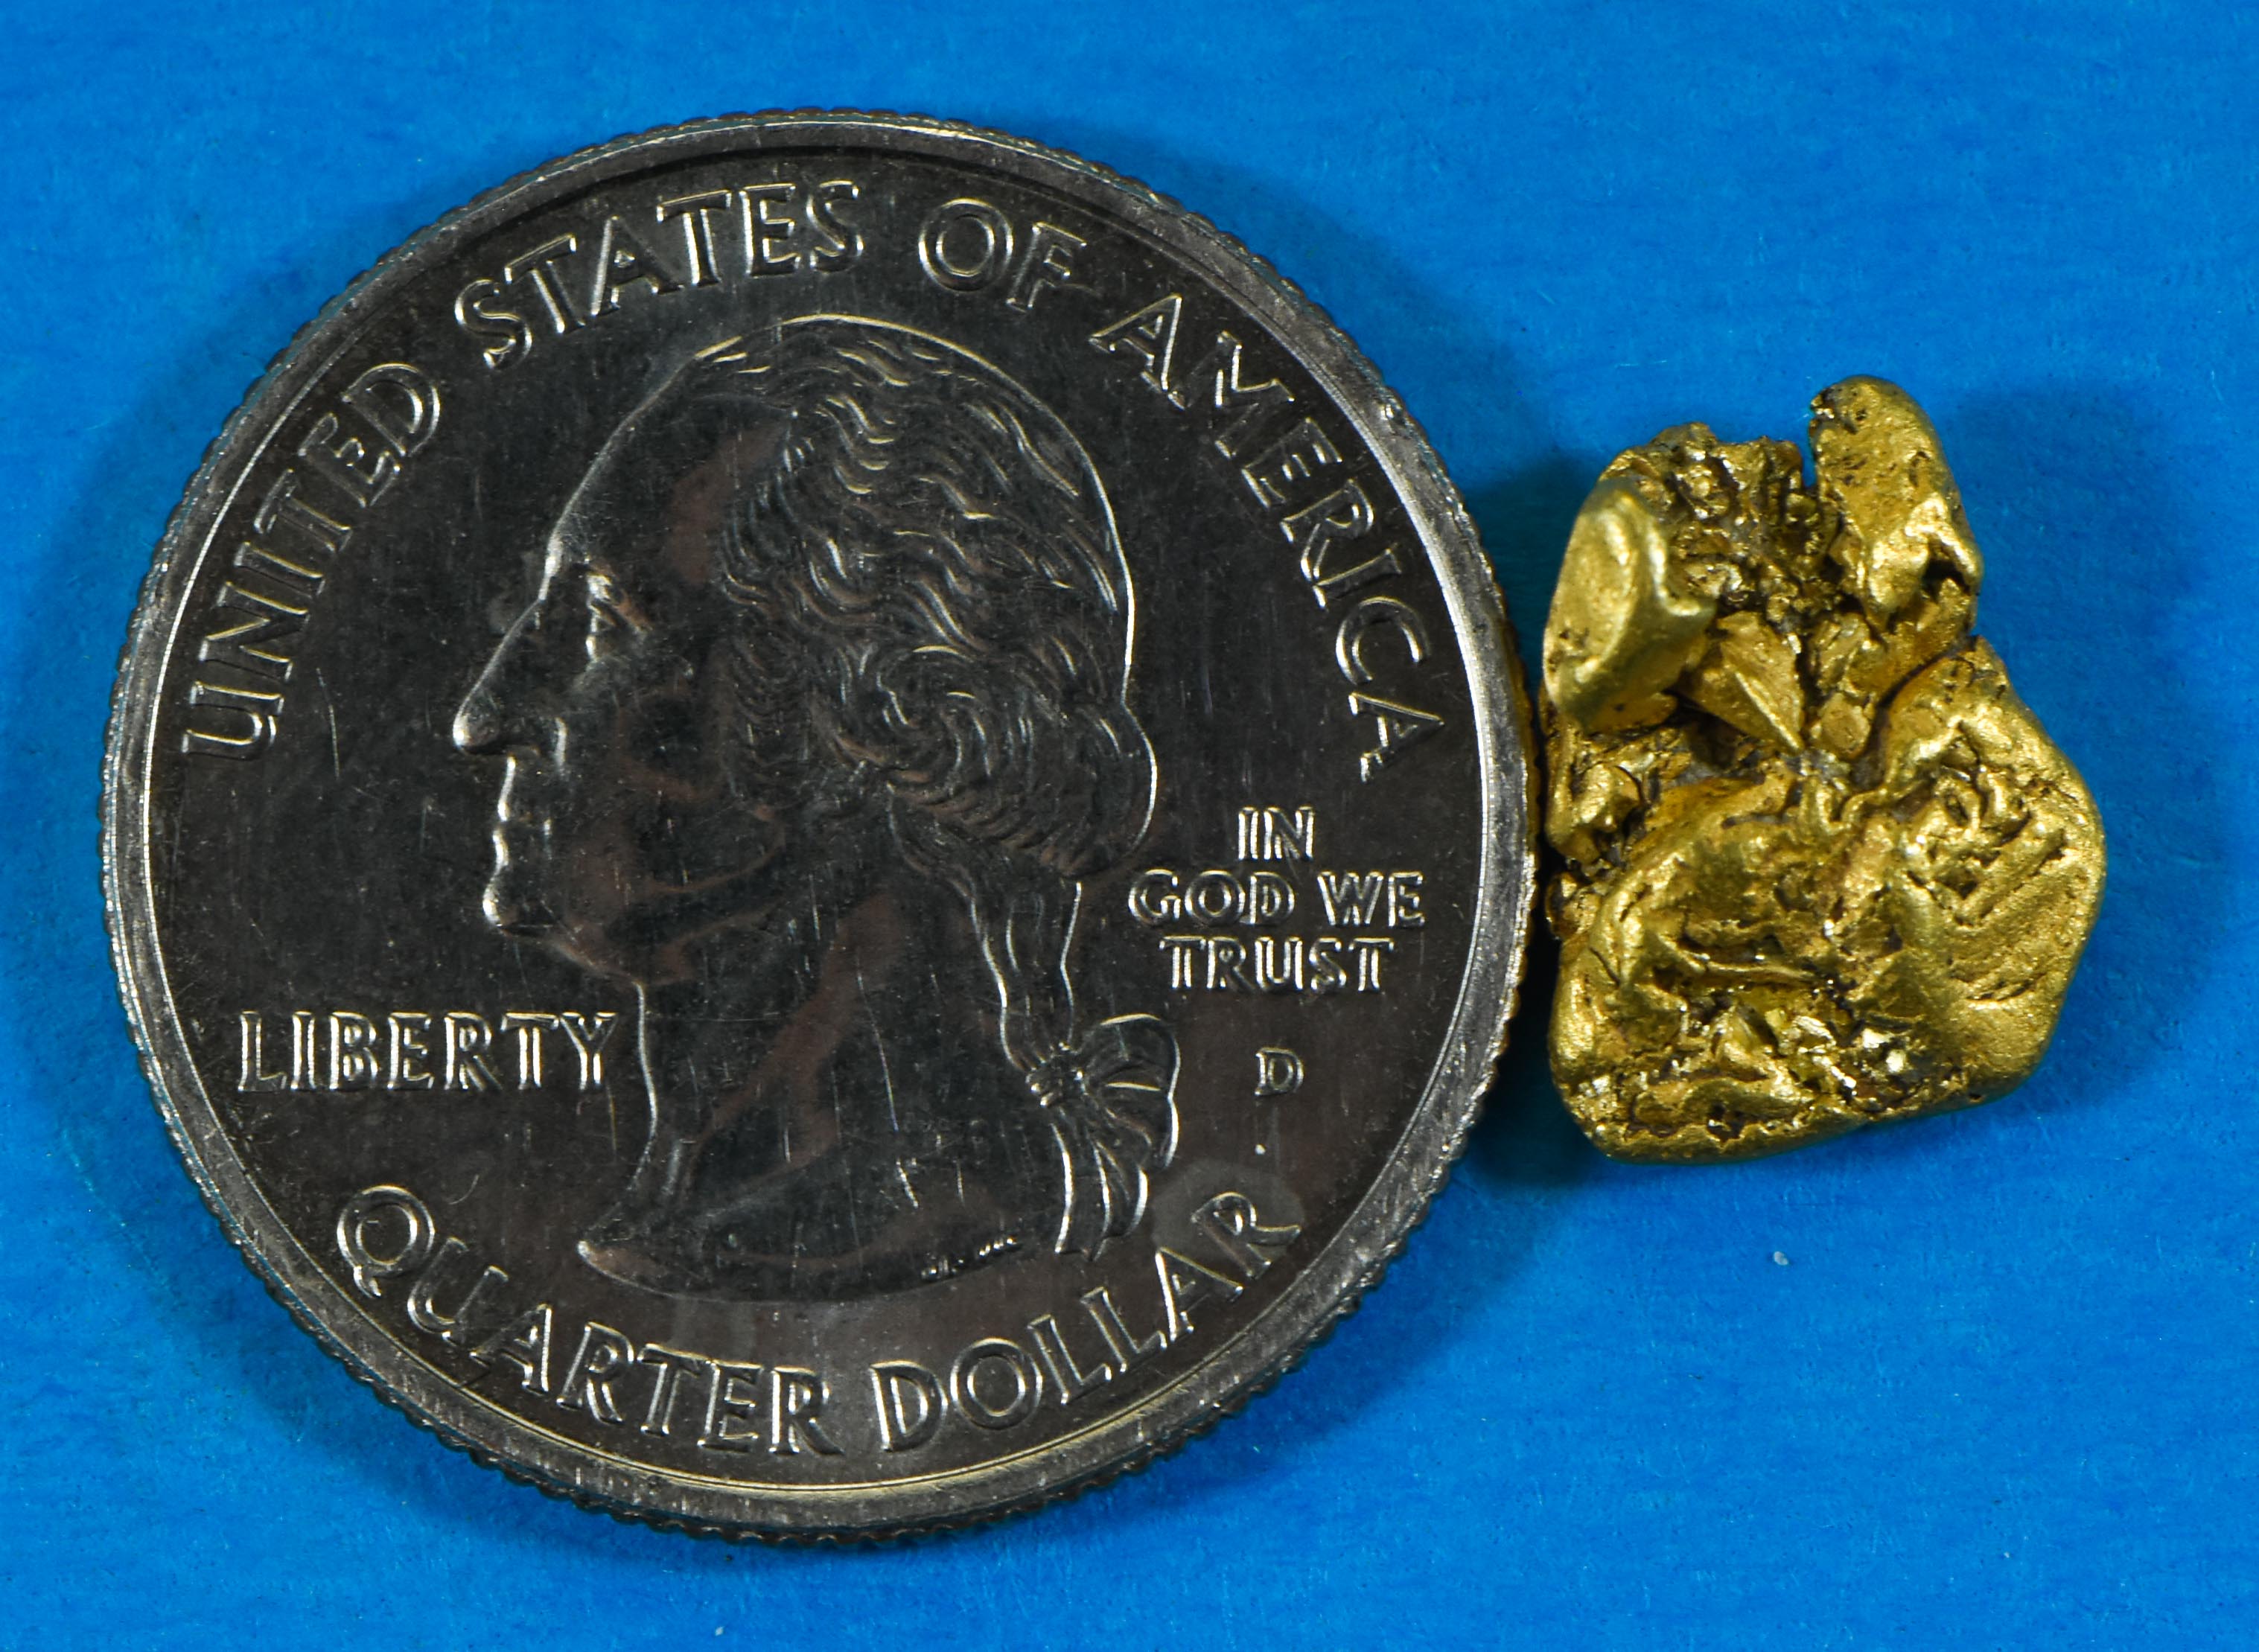 L-12 Alaskan BC Dendritic Exotic Shaped Gold Nugget "Special Collection" 2.39 Grams